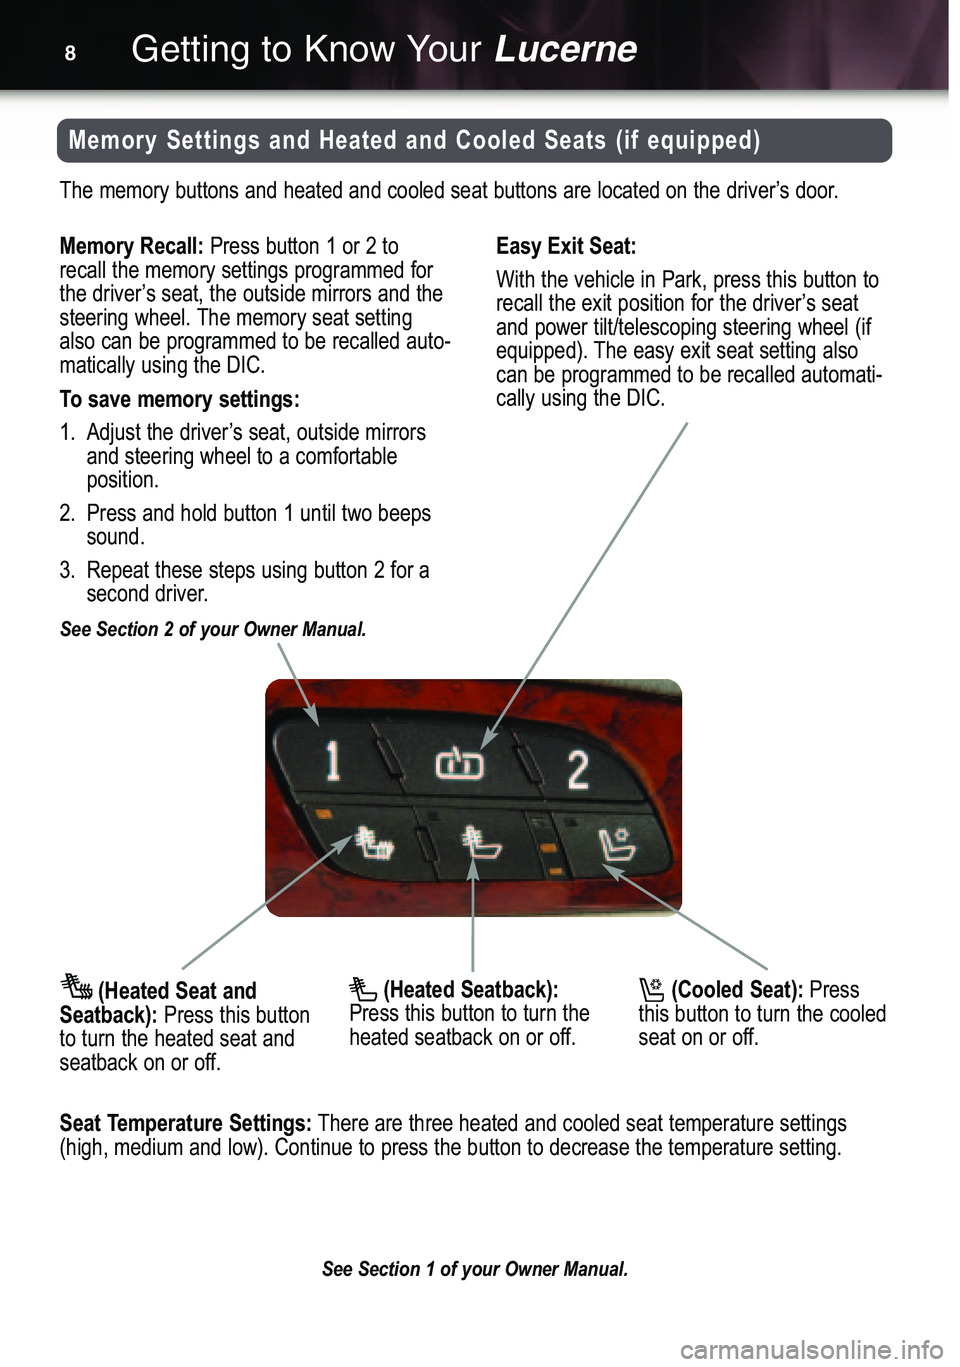 BUICK LUCERNE 2007  Get To Know Guide (Cooled Seat):Press
this button to turn the cooledseat on or off.
Getting to Know YourLucerne8
(Heated Seat and
Seatback):Press this button
to turn the heated seat andseatback on or off.
The memory bu